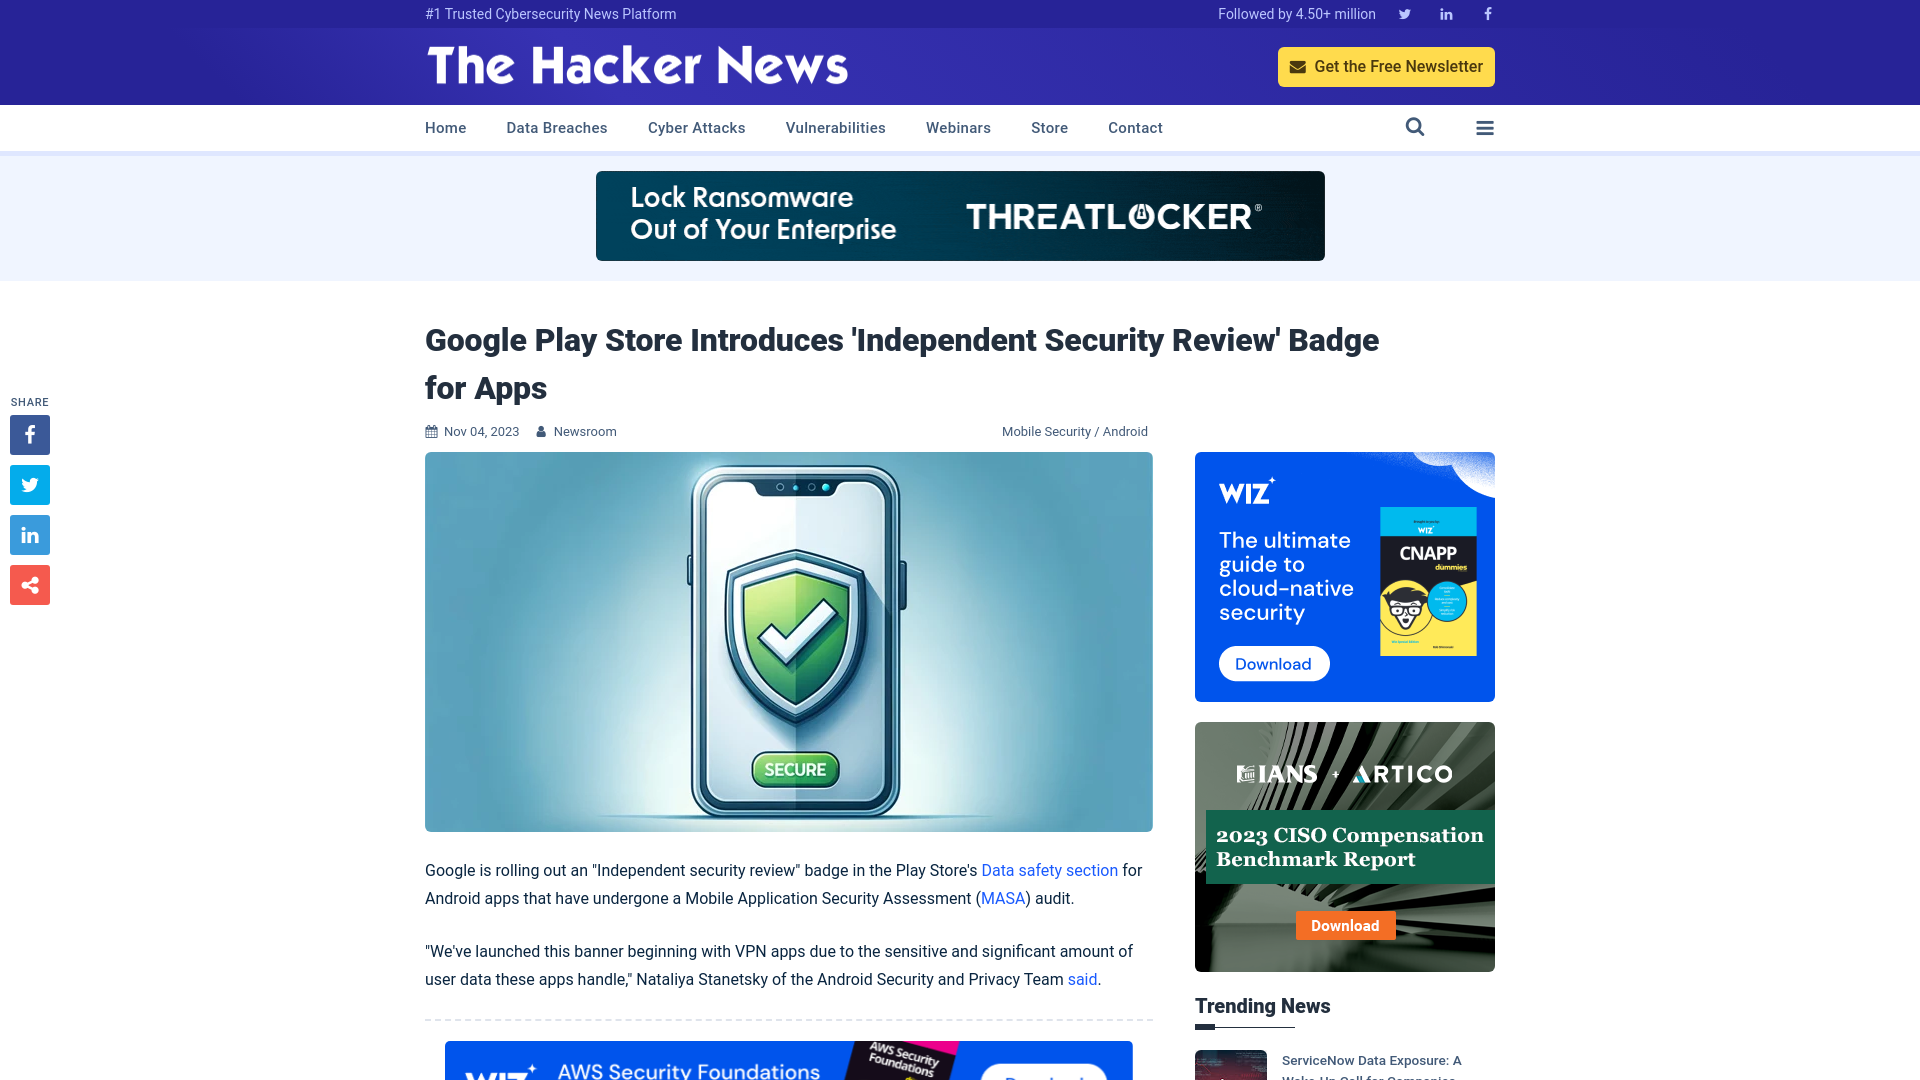 Google Play Store Introduces 'Independent Security Review' Badge for Apps